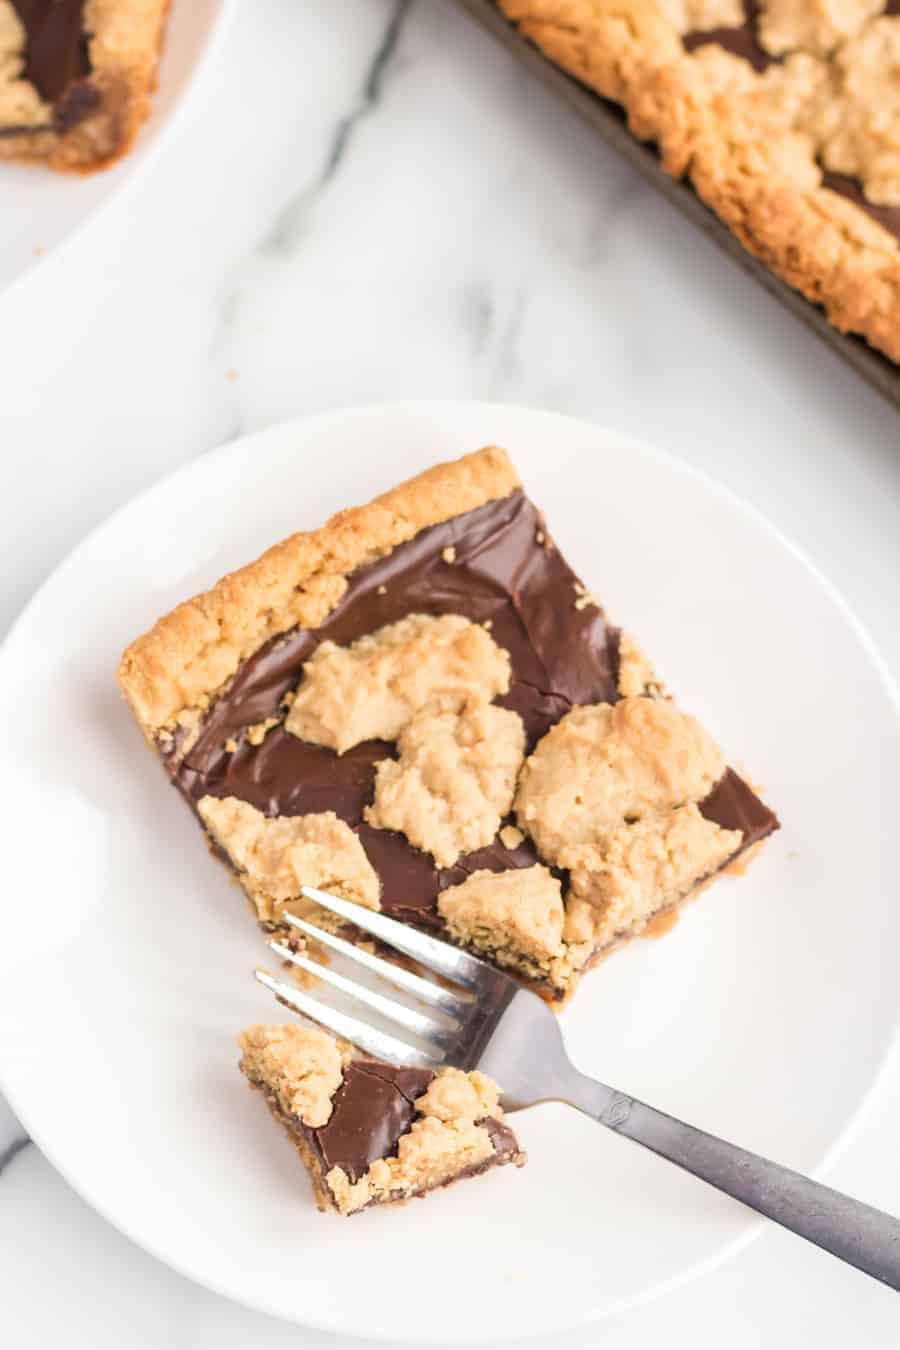 Perfectly equal parts chewy, crusty, and soft, these Peanut Butter Oat Jumbles bars are one of the best chocolate-peanut butter cookie desserts around.